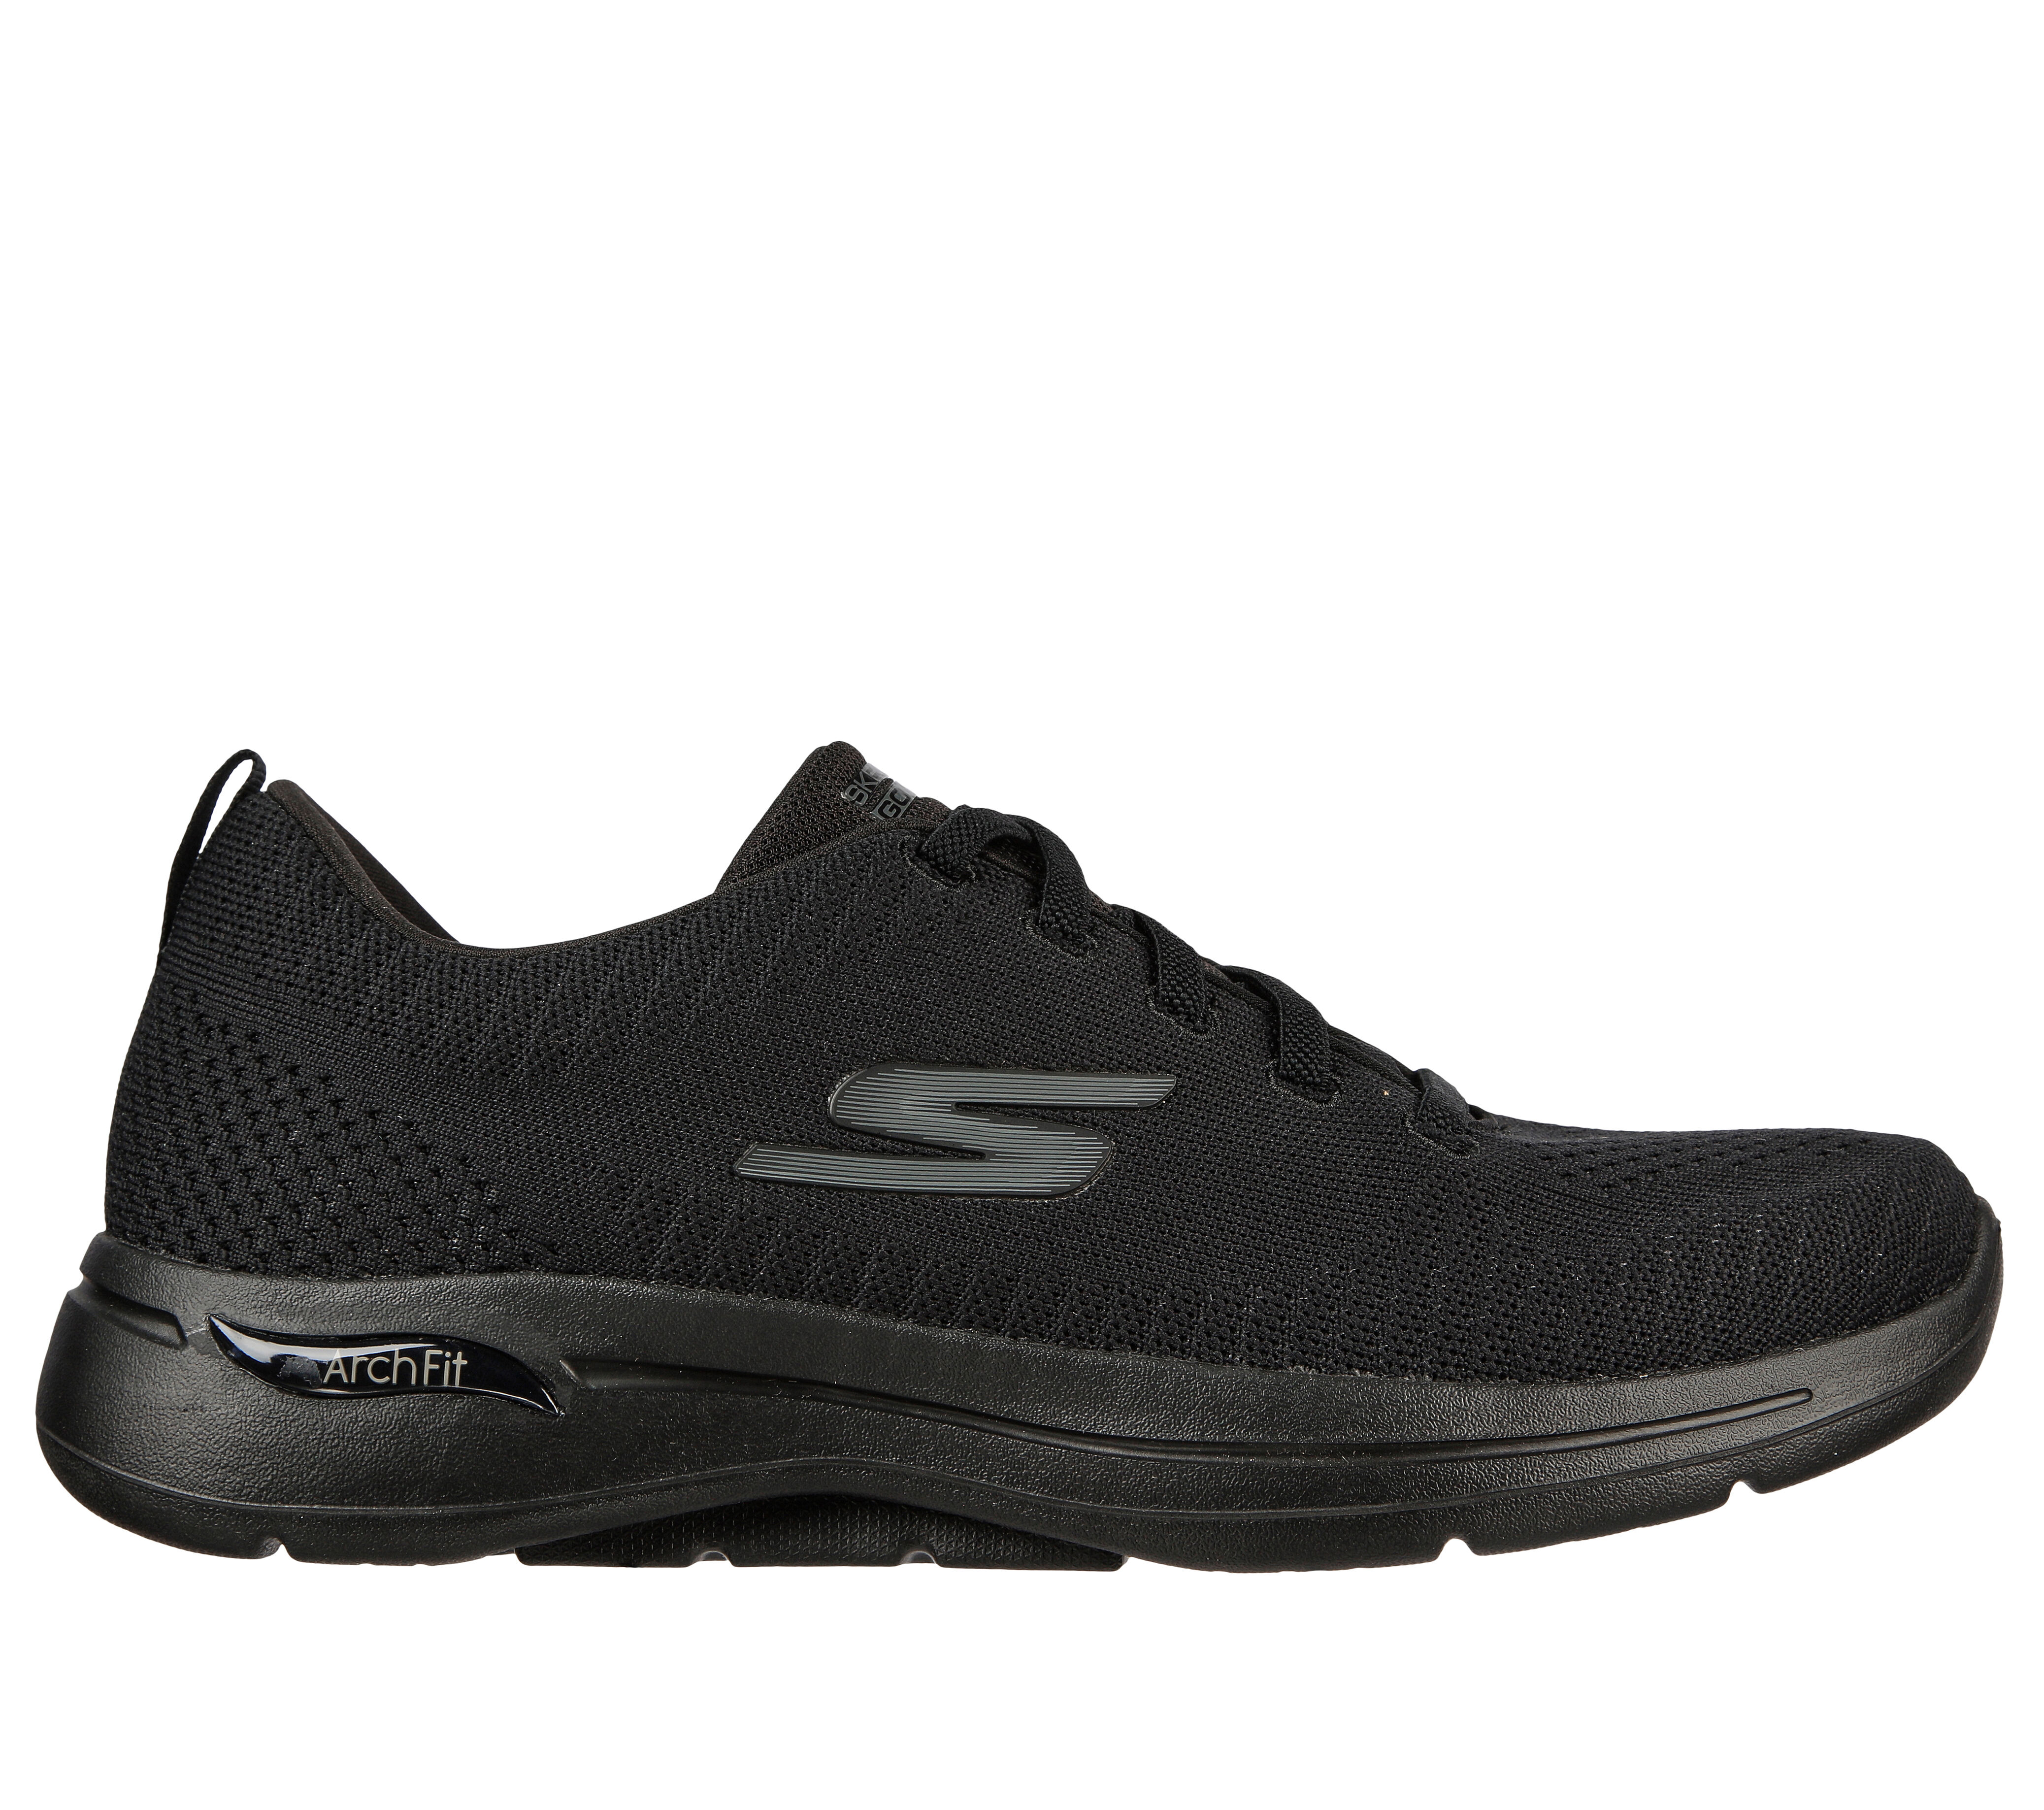 GO WALK Arch Fit - Grand Select | SKECHERS UK